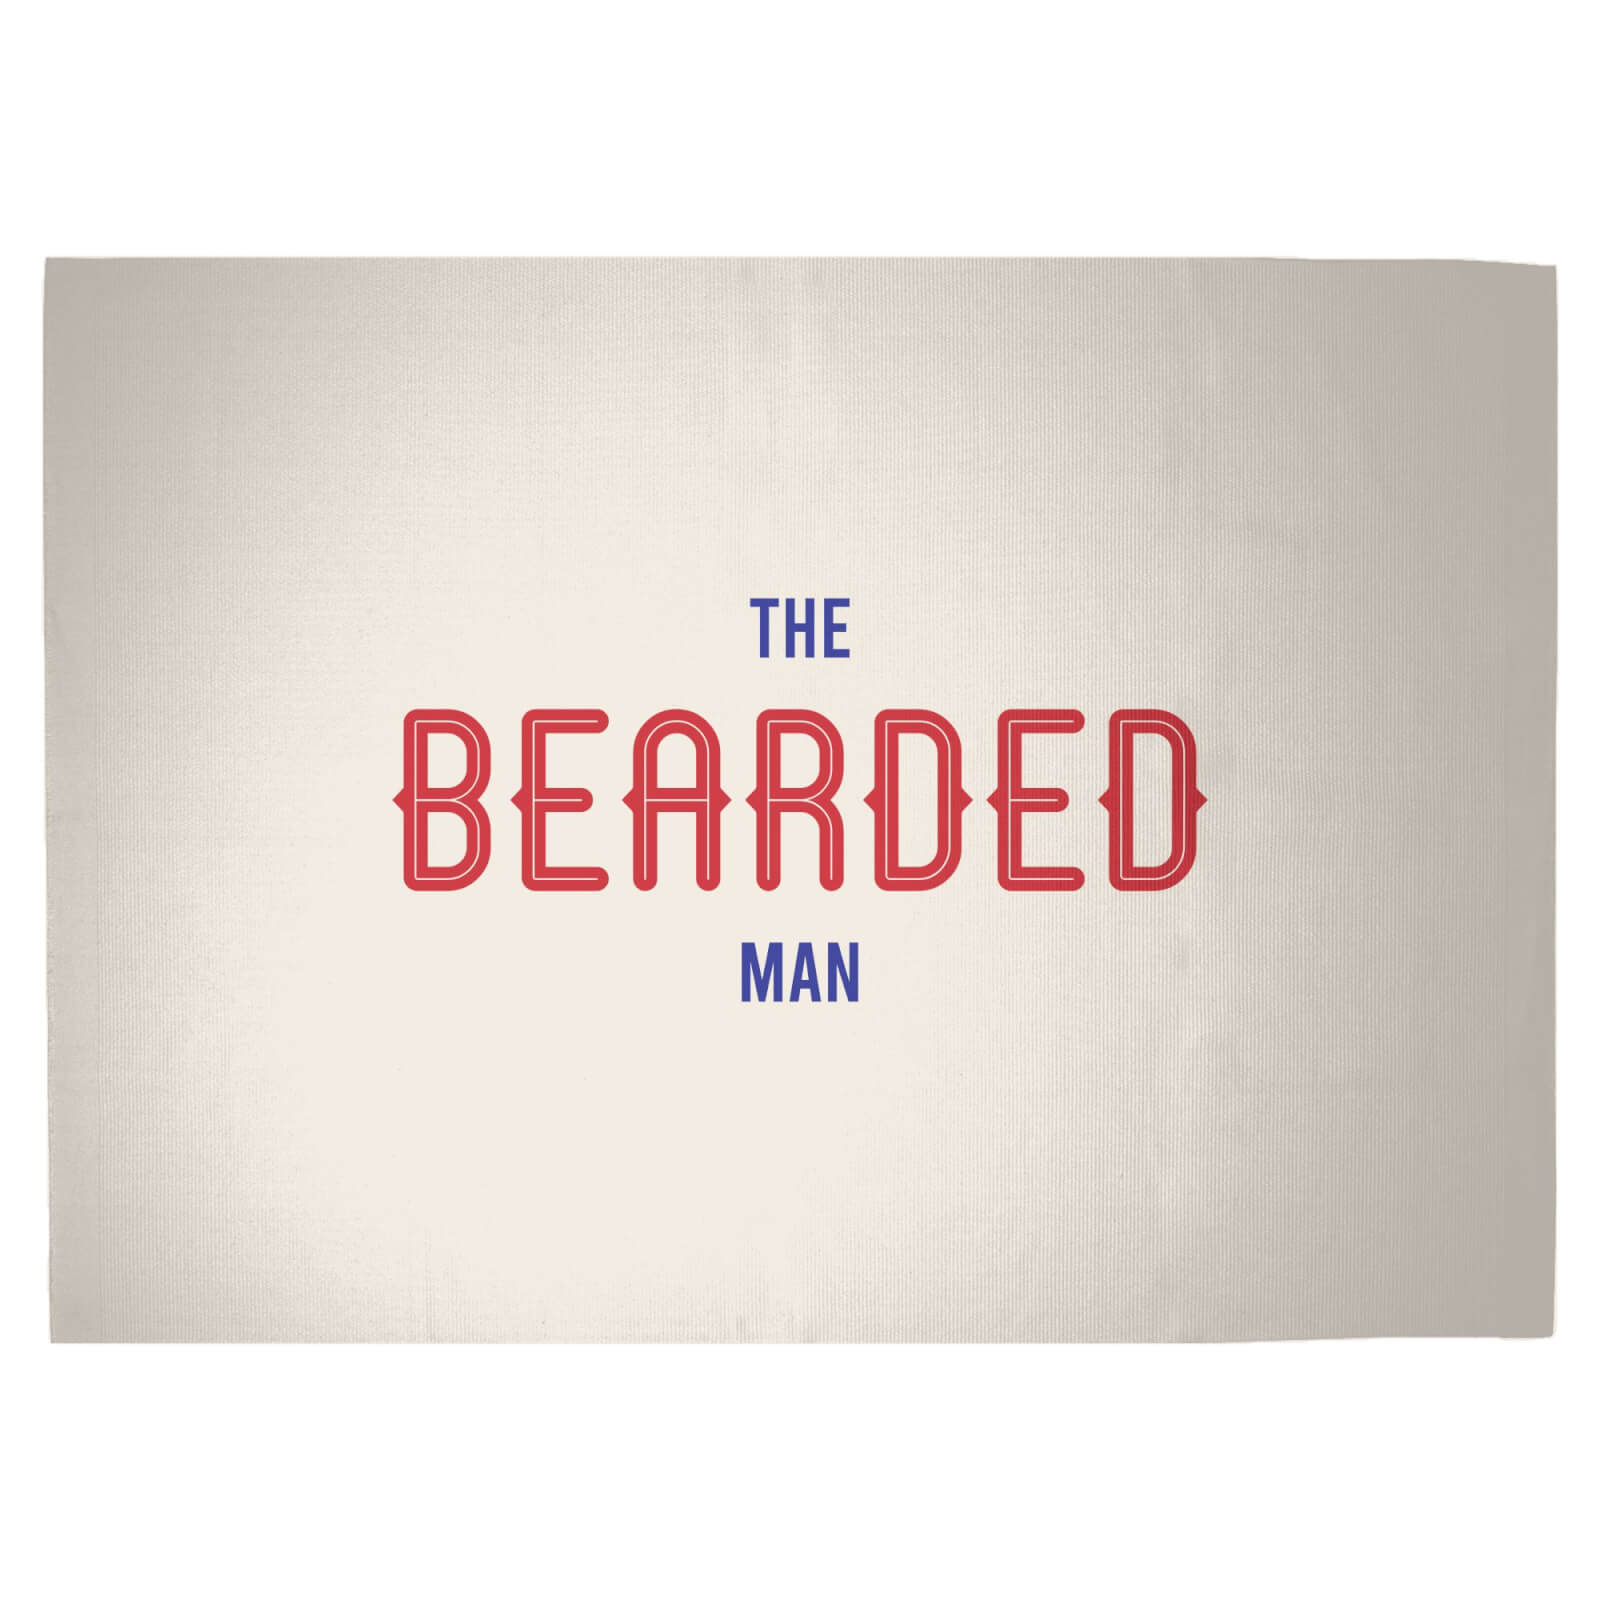 The Bearded Man Woven Rug - Large